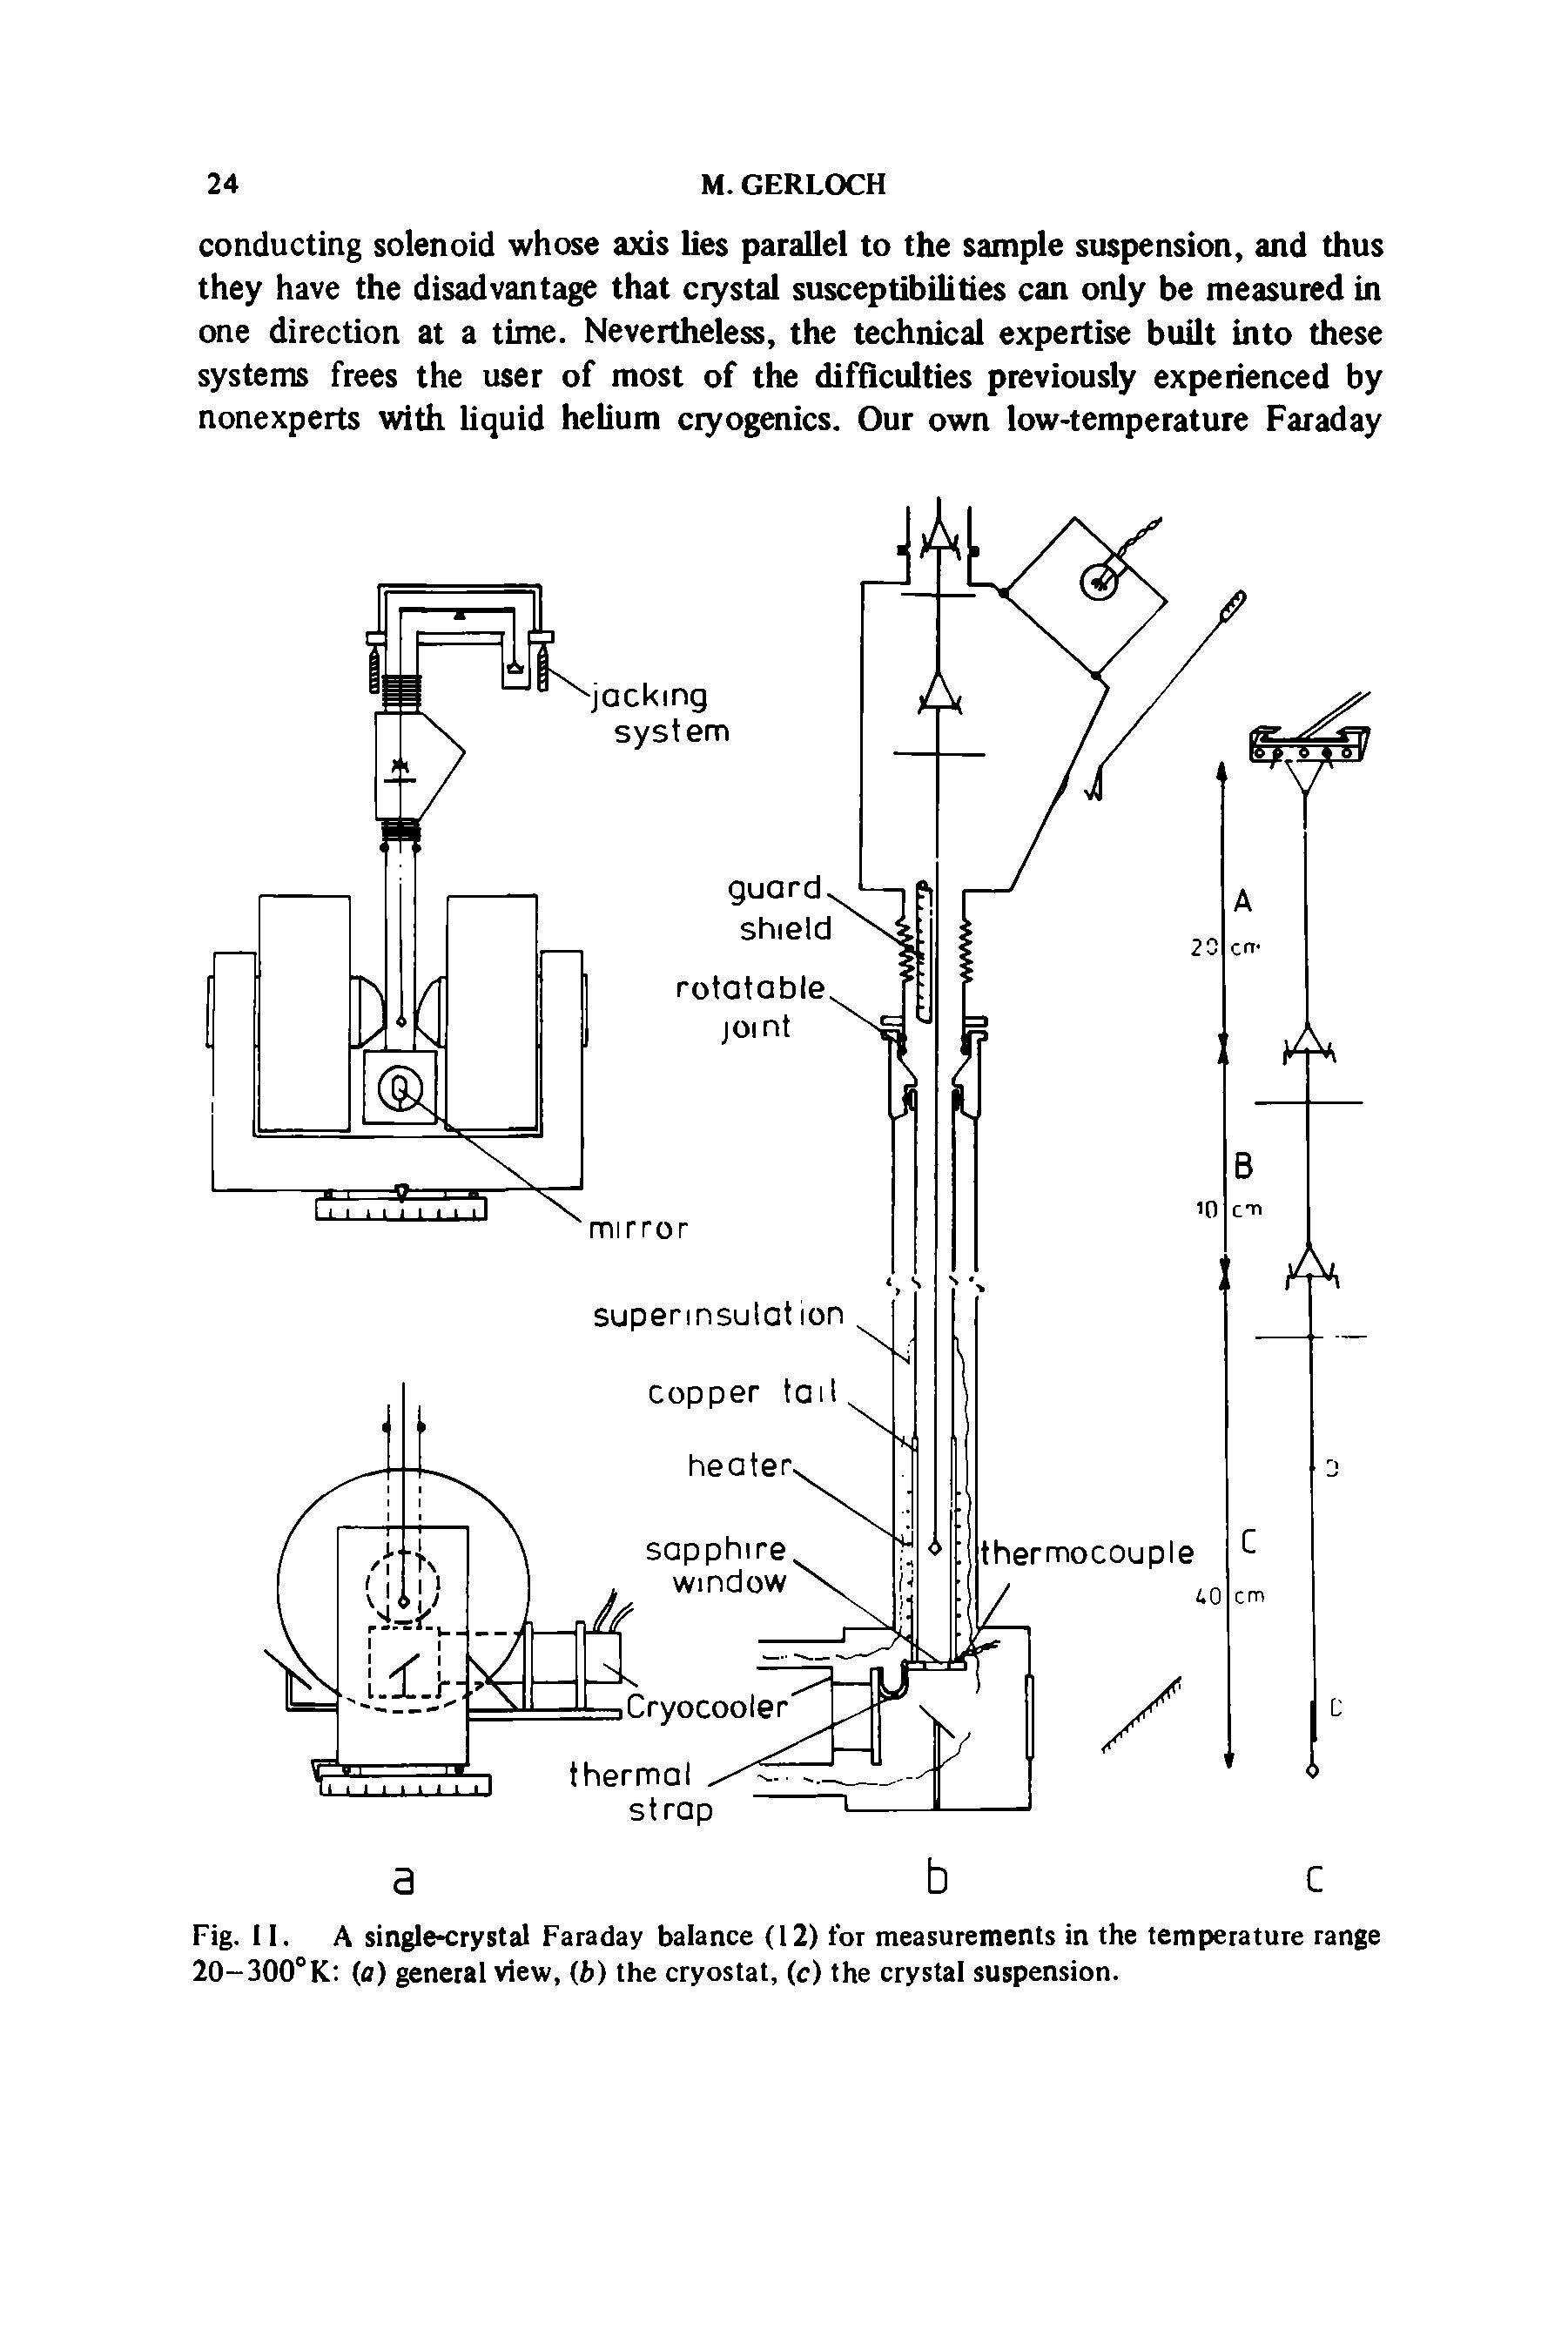 Fig. II. A single-crystal Faraday balance (12) for measurements in the temperature range 20-300°K (a) general view, (b) the cryostat, (c) the crystal suspension.